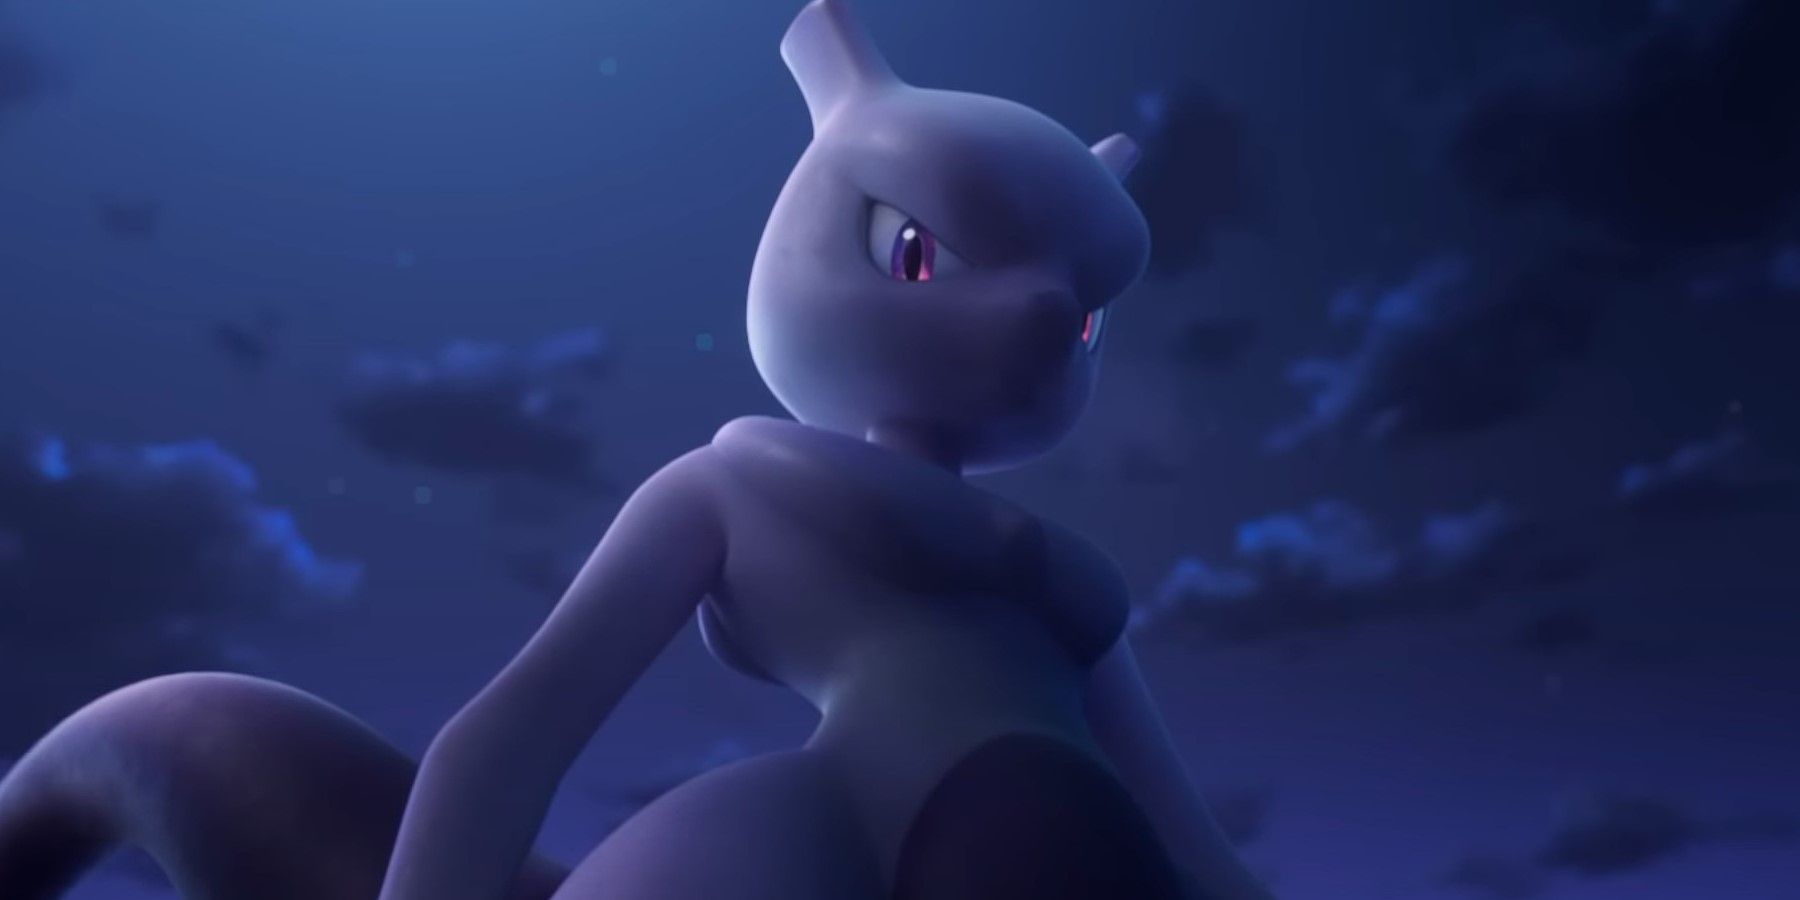 Mewtwo stares down menacingly from the sky